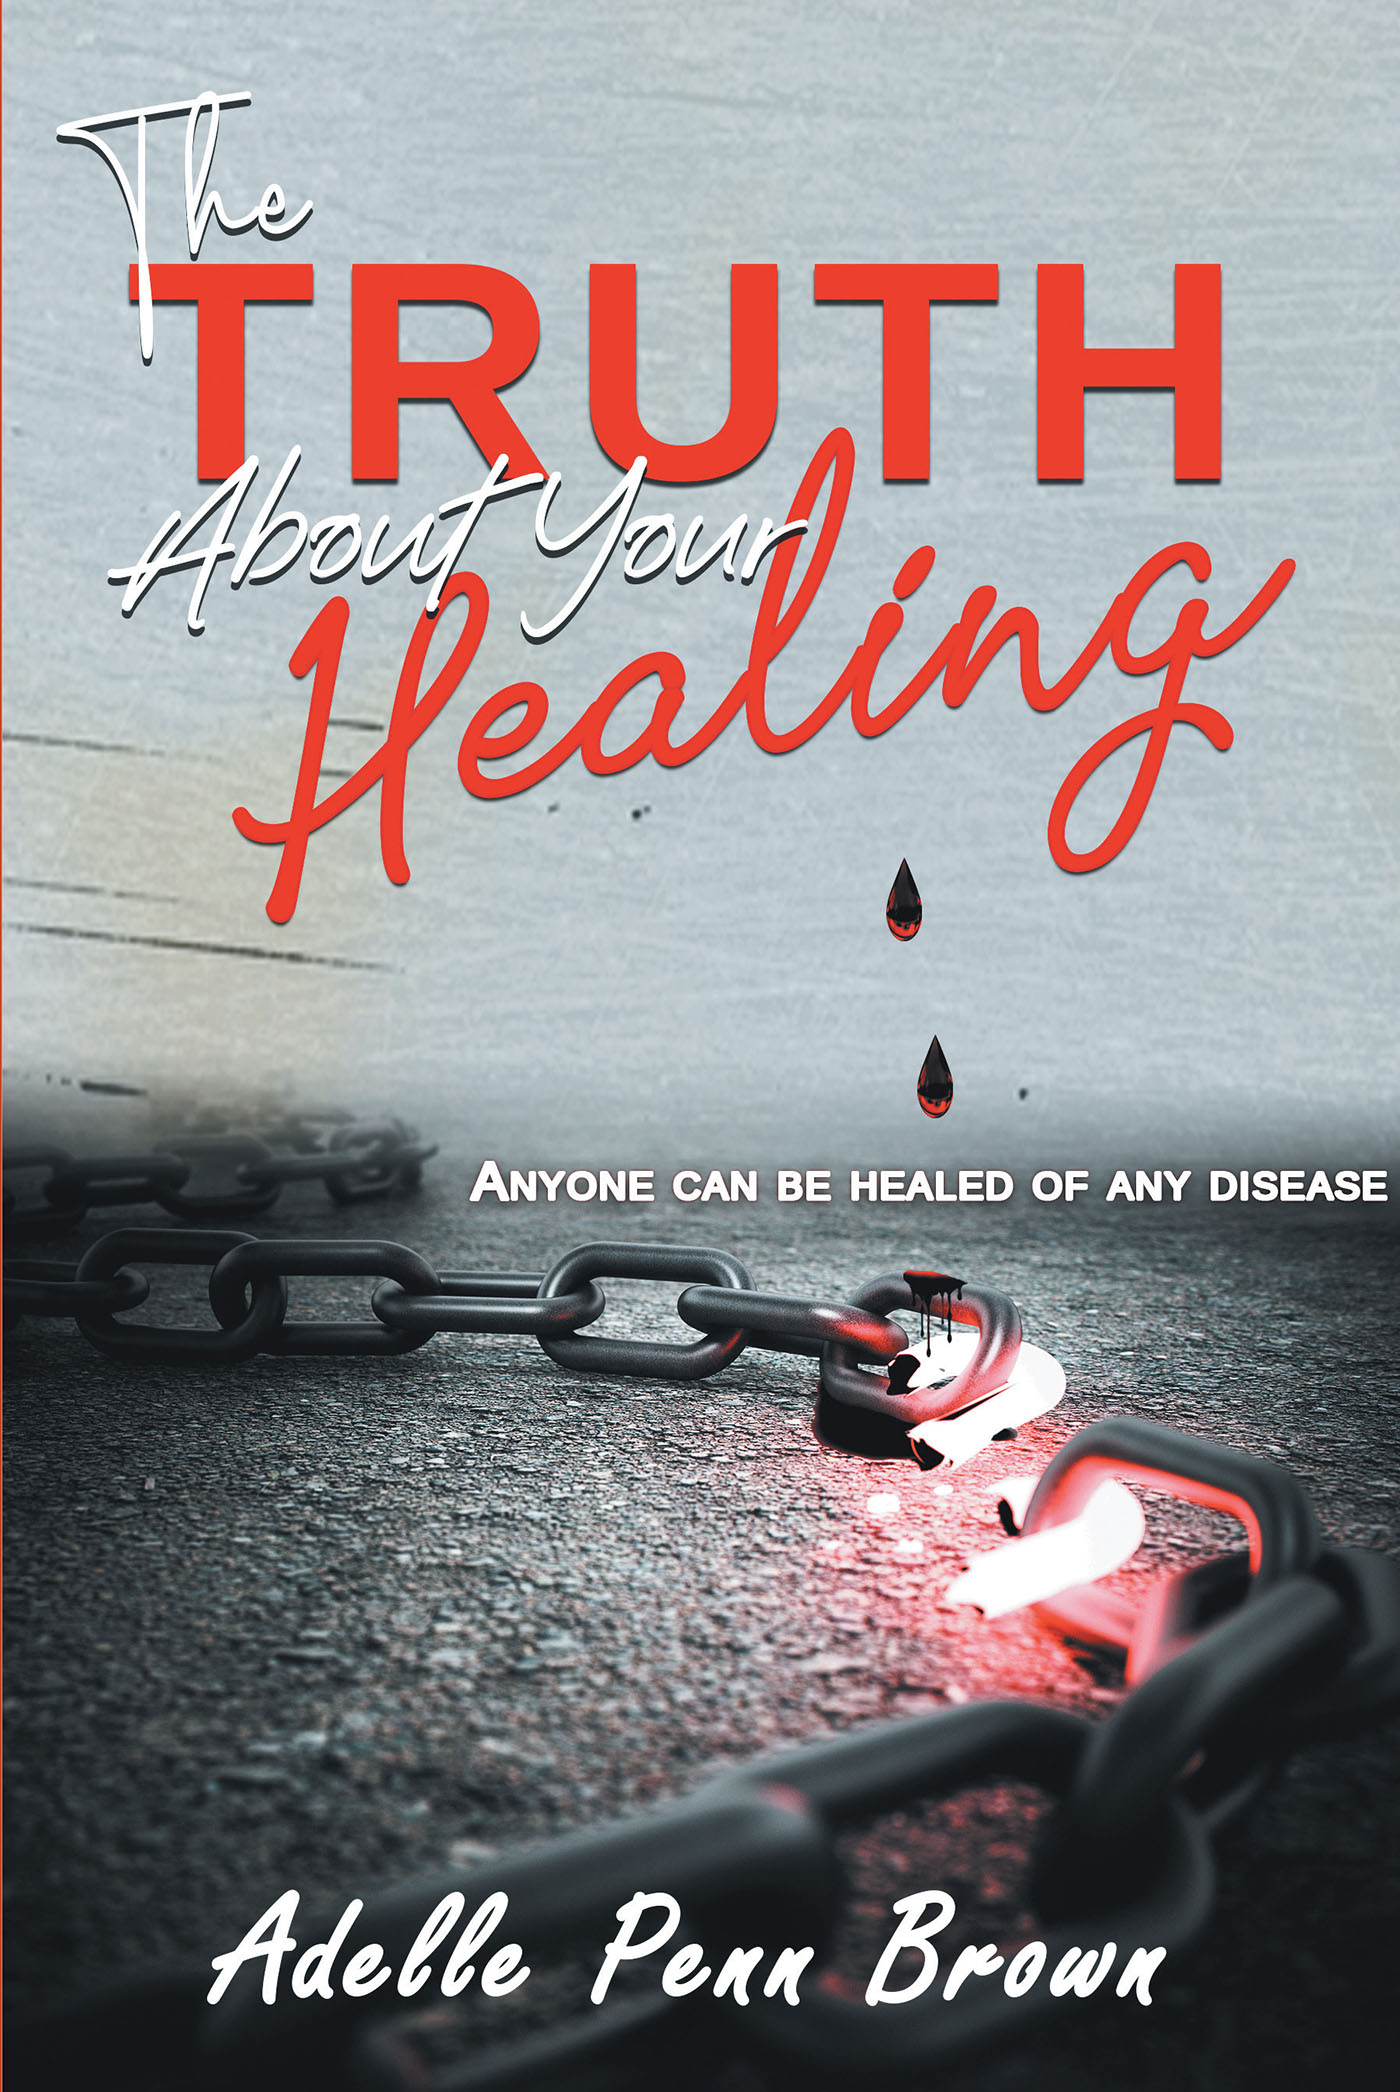 Author Adelle Penn-Brown, D. Min.’s New Book “The Truth About Your Healing” is a Stirring Account of the Incredible Healing Power of the Lord as Experienced by the Author